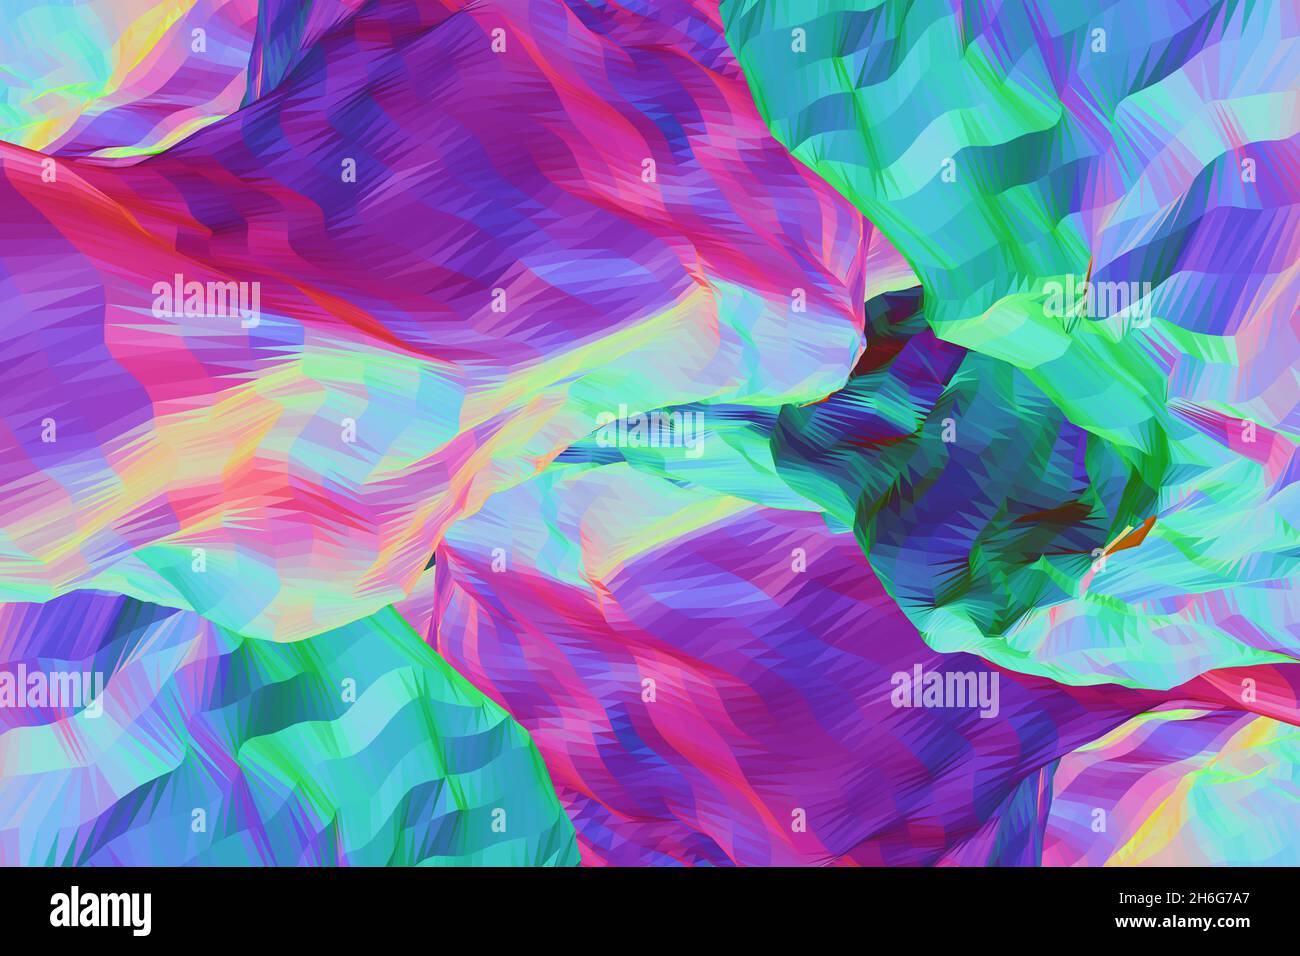 Abstract colorful background with random shaped wavy triangular surface ...